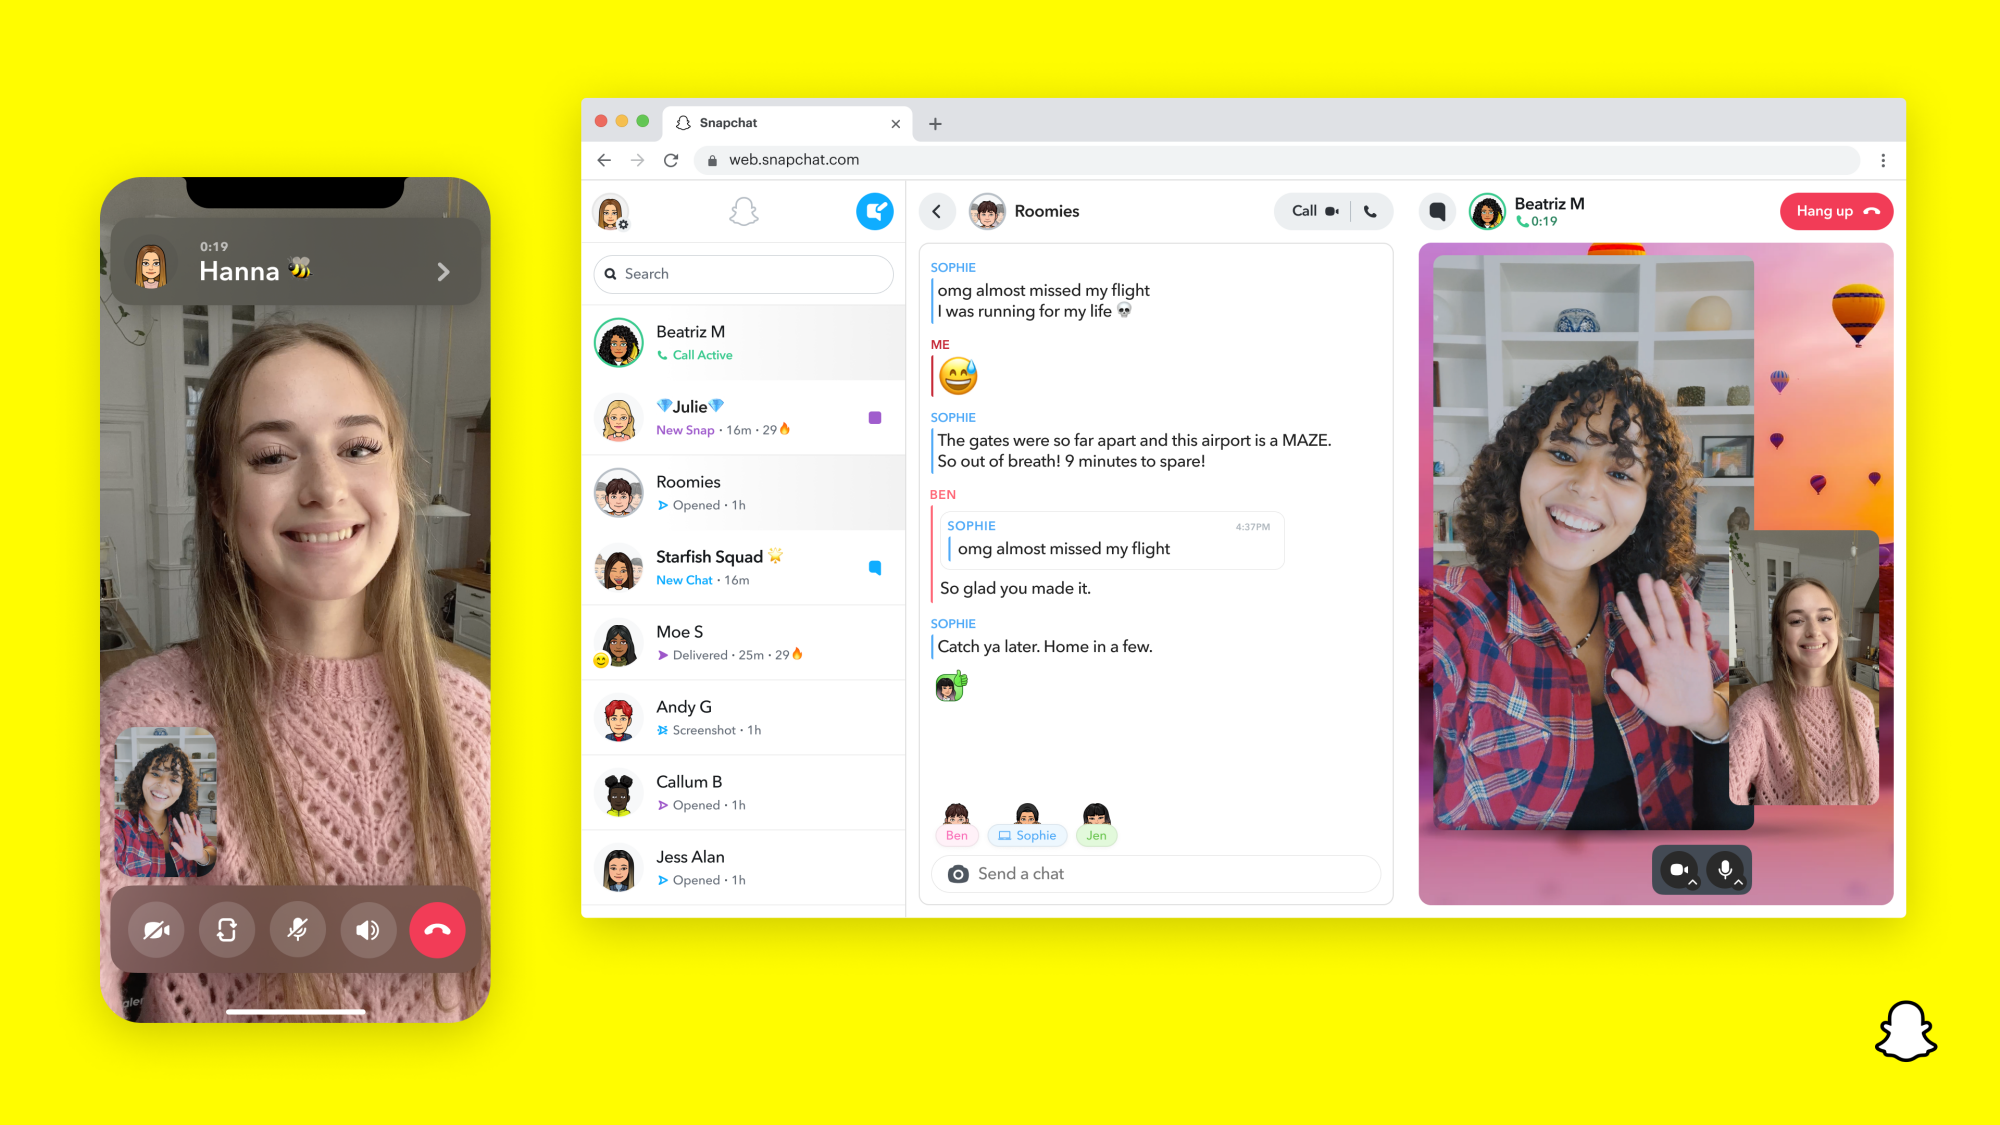 Snapchat video chat interface shown on mobile and desktop, set against yellow background.